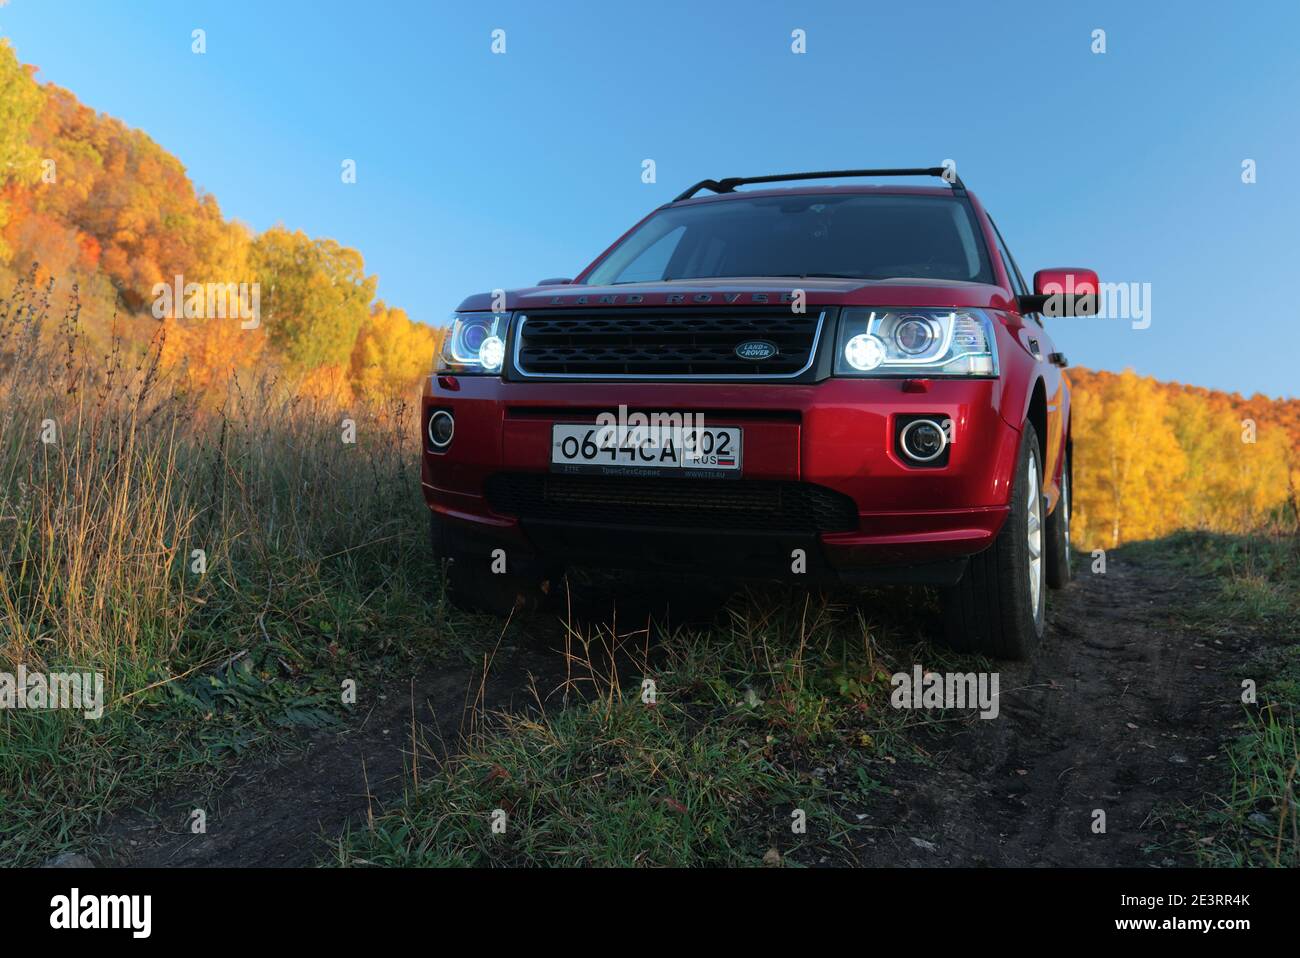 RUSSIA, Rep. of BASHKORTOSTAN, Kugarchinsky District, MRAKOVO village - SEPTEMBER 27, 2020. A red LAND ROVER FREELANDER 2 SUV stands on a dirt road in Stock Photo